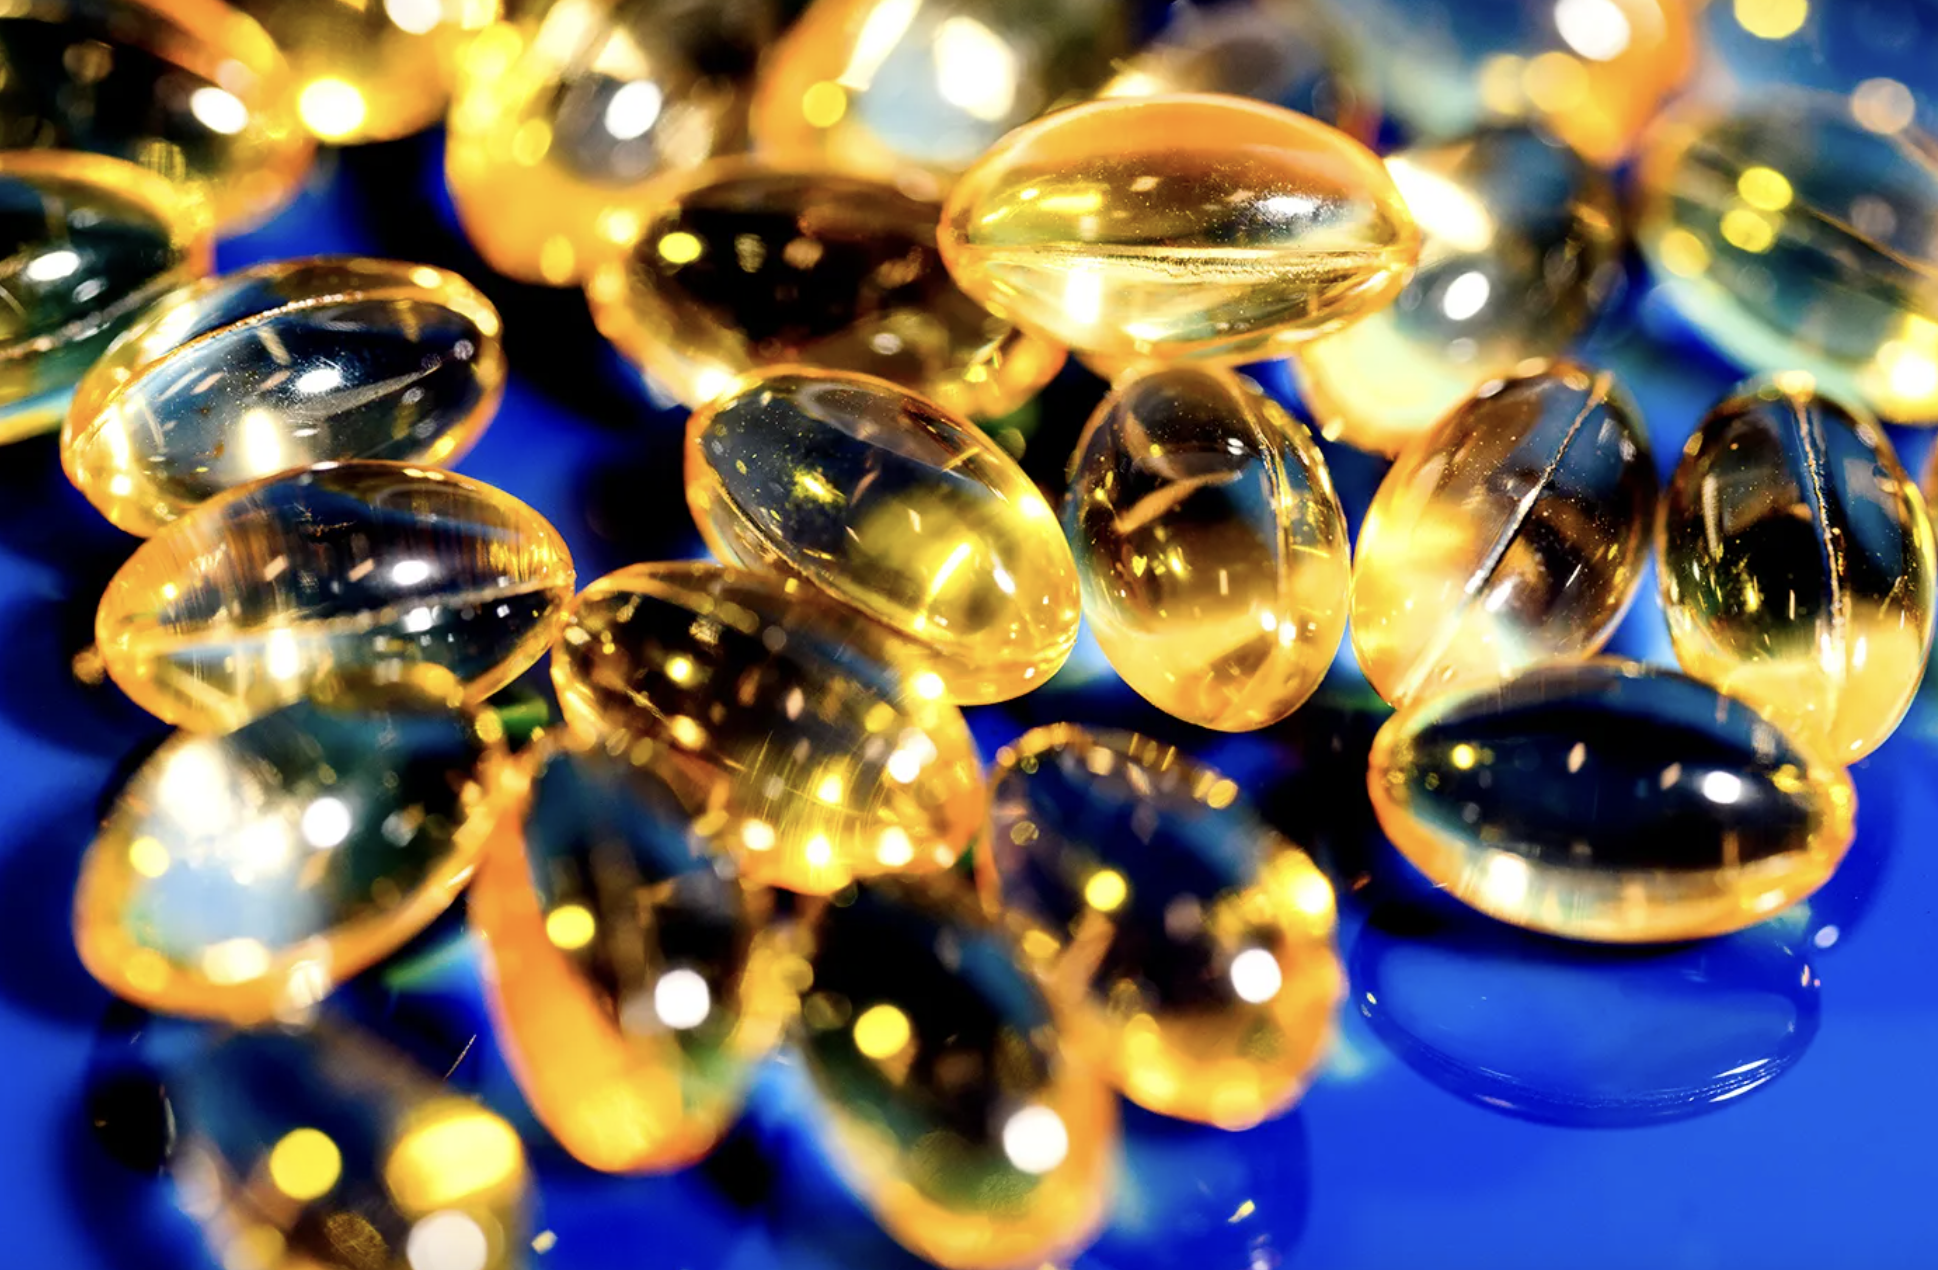 Should you supplement with these vitamin D capsules? Photo by Matthew Modoono/Northeastern University